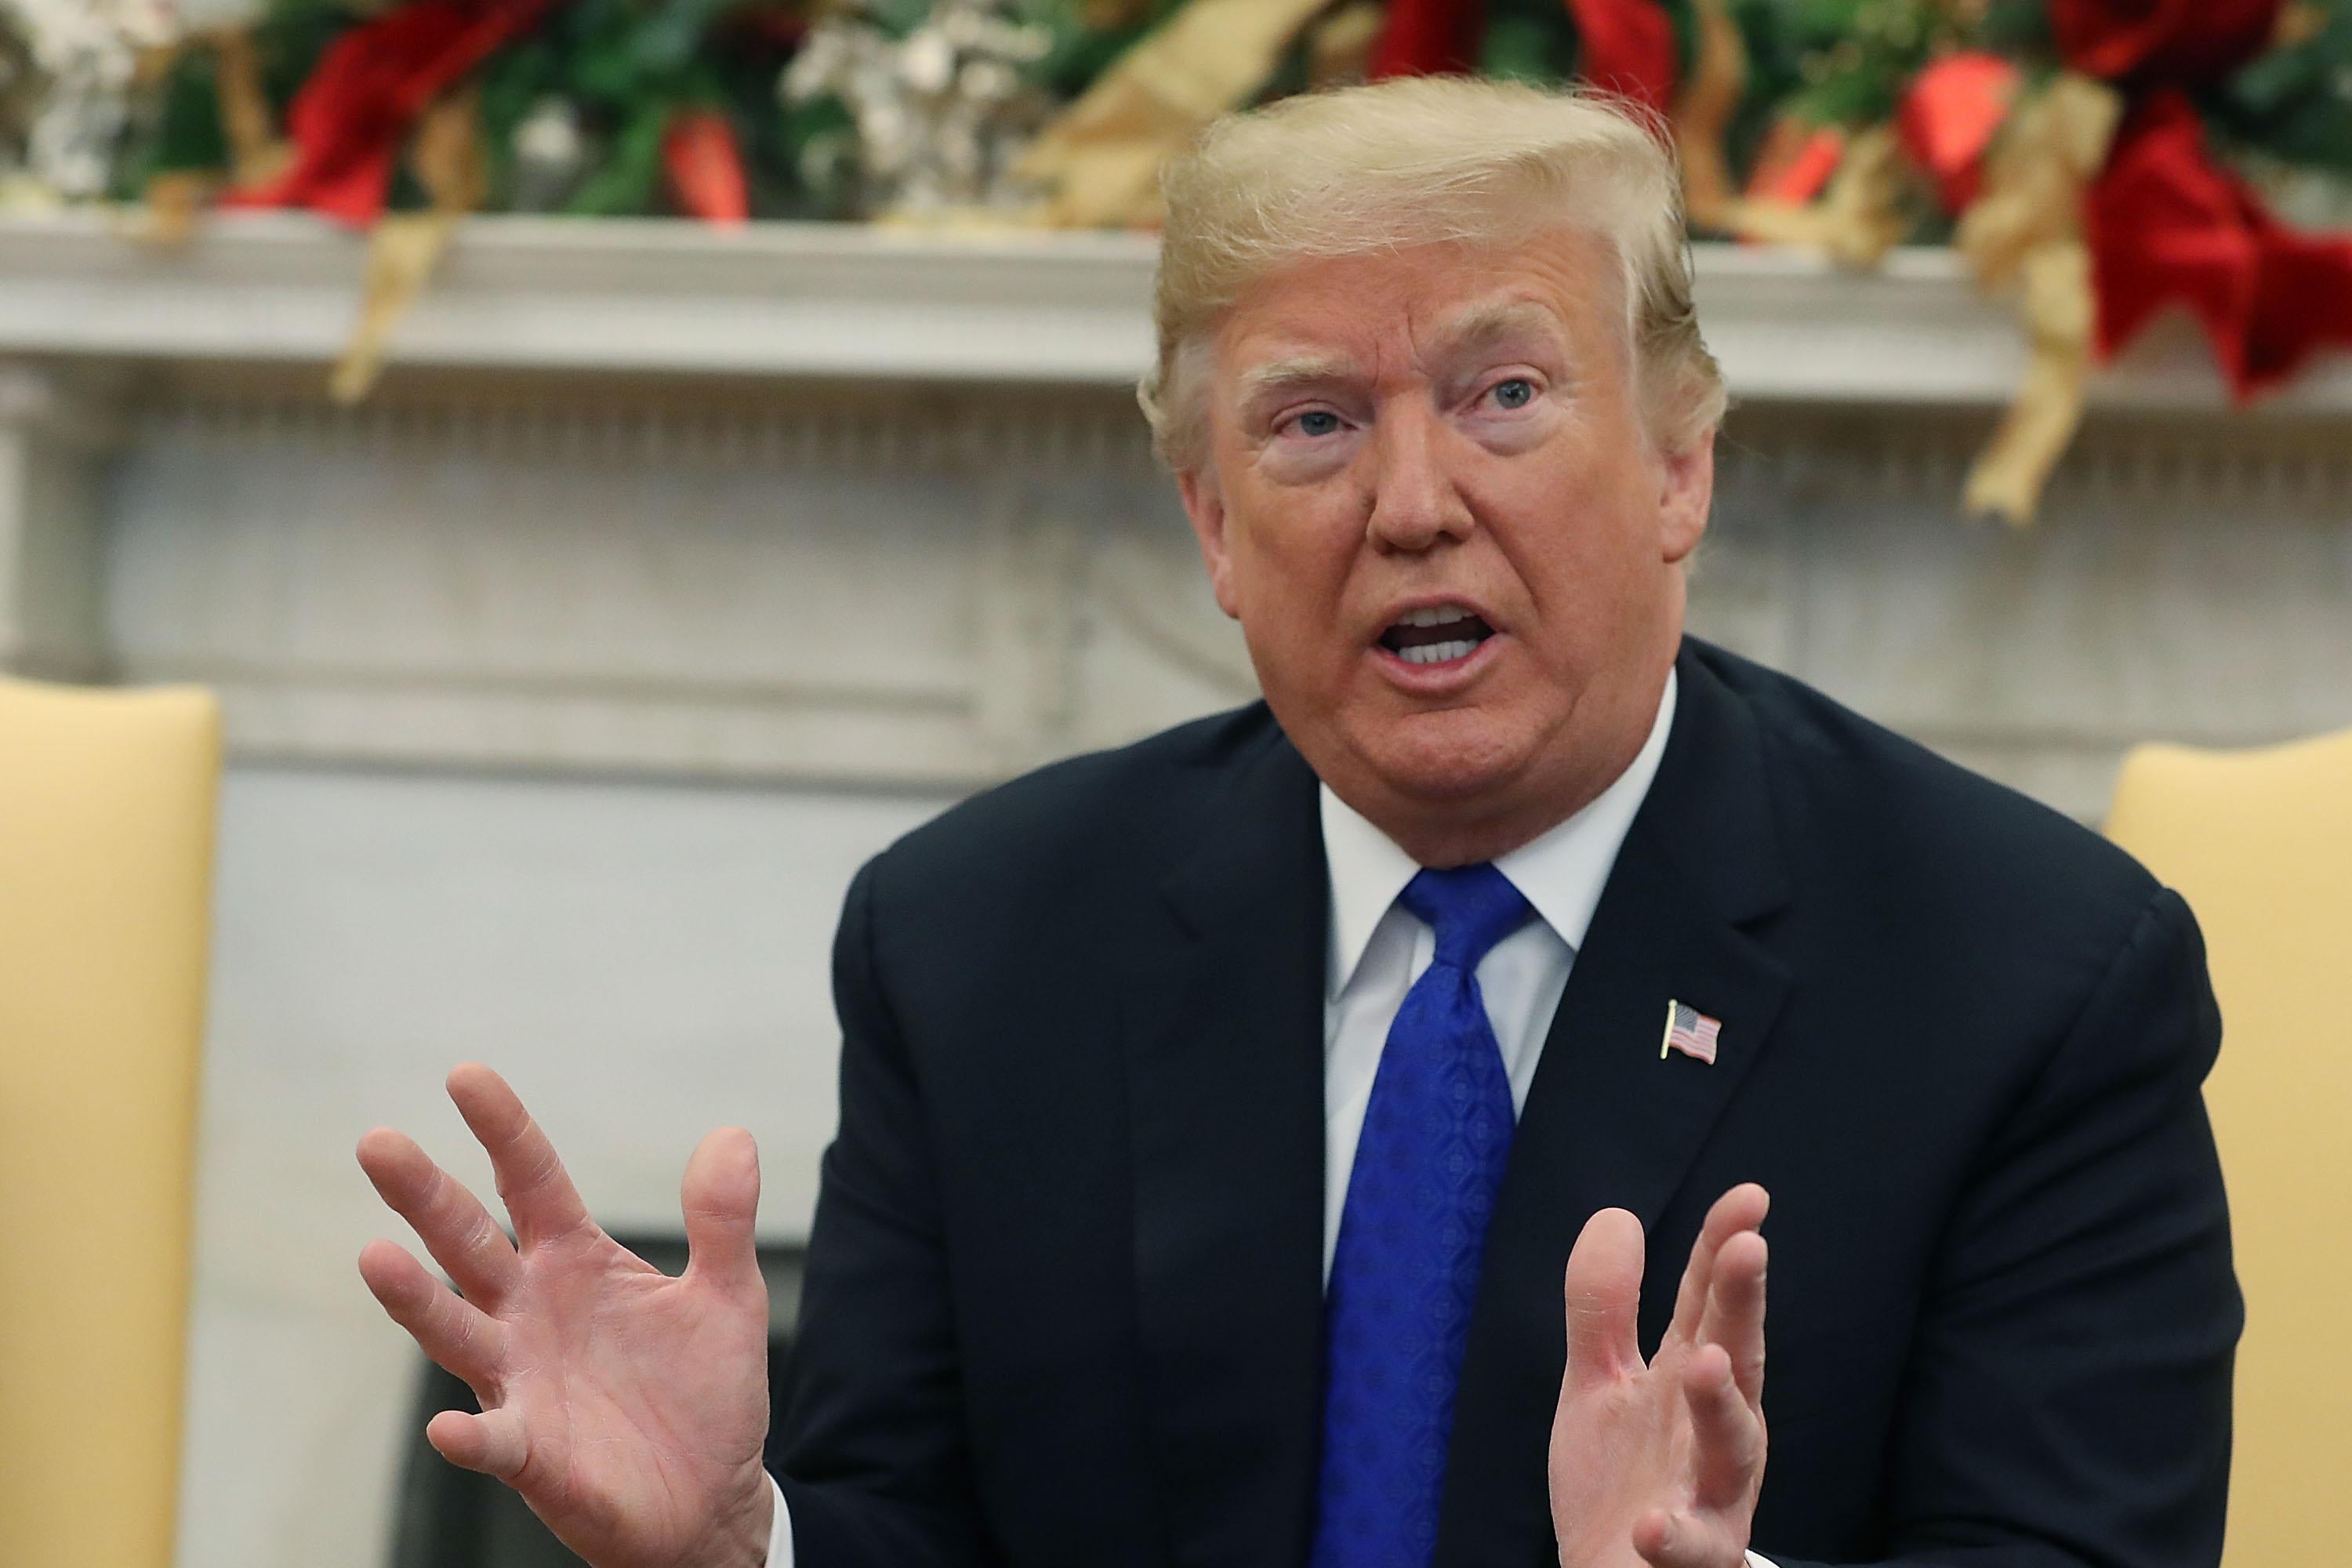 Trump gestures outward with both hands as he speaks. He is seated in the Oval Office, which is decorated for Christmas.